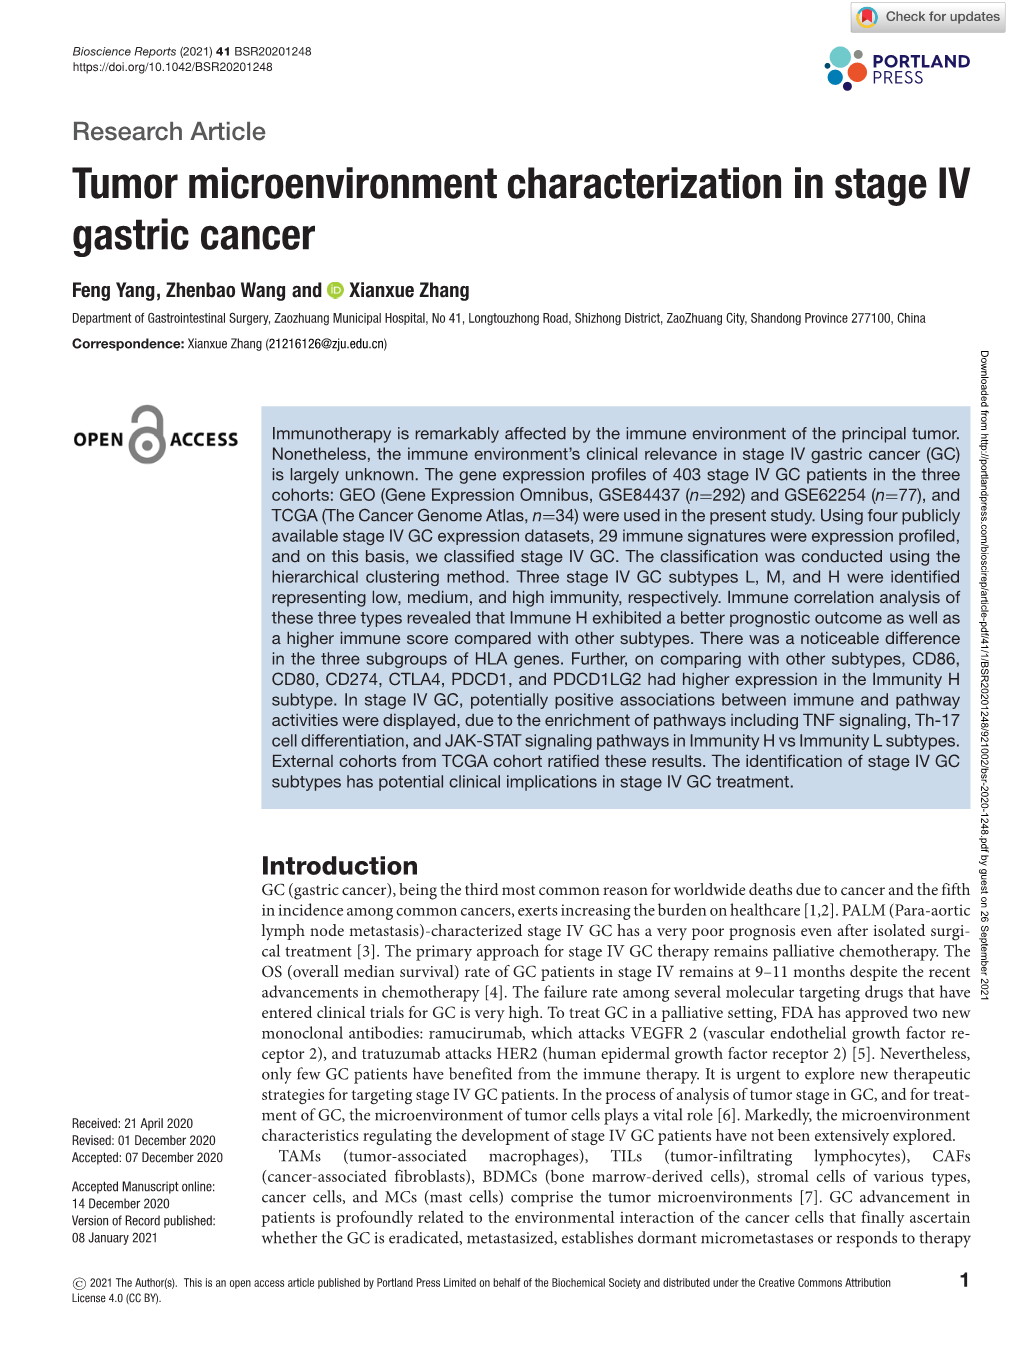 Tumor Microenvironment Characterization in Stage IV Gastric Cancer